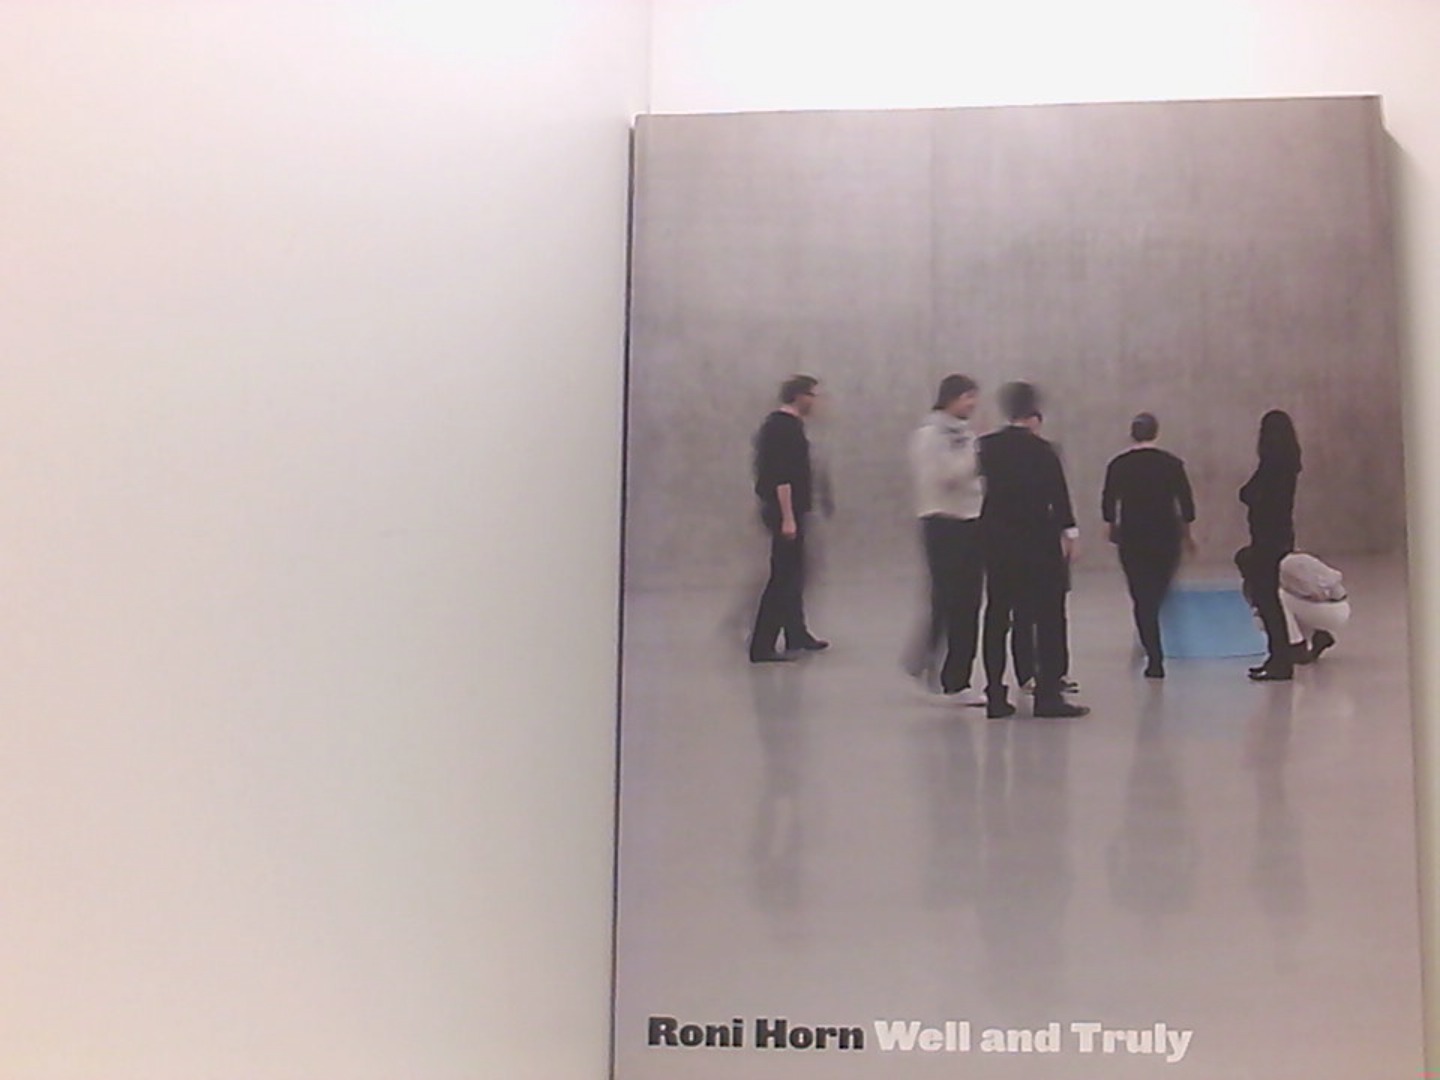 Roni Horn: Well and Truly - Dziewior, Yilmaz, Bregenz Kunsthaus Roni Horn u. a.